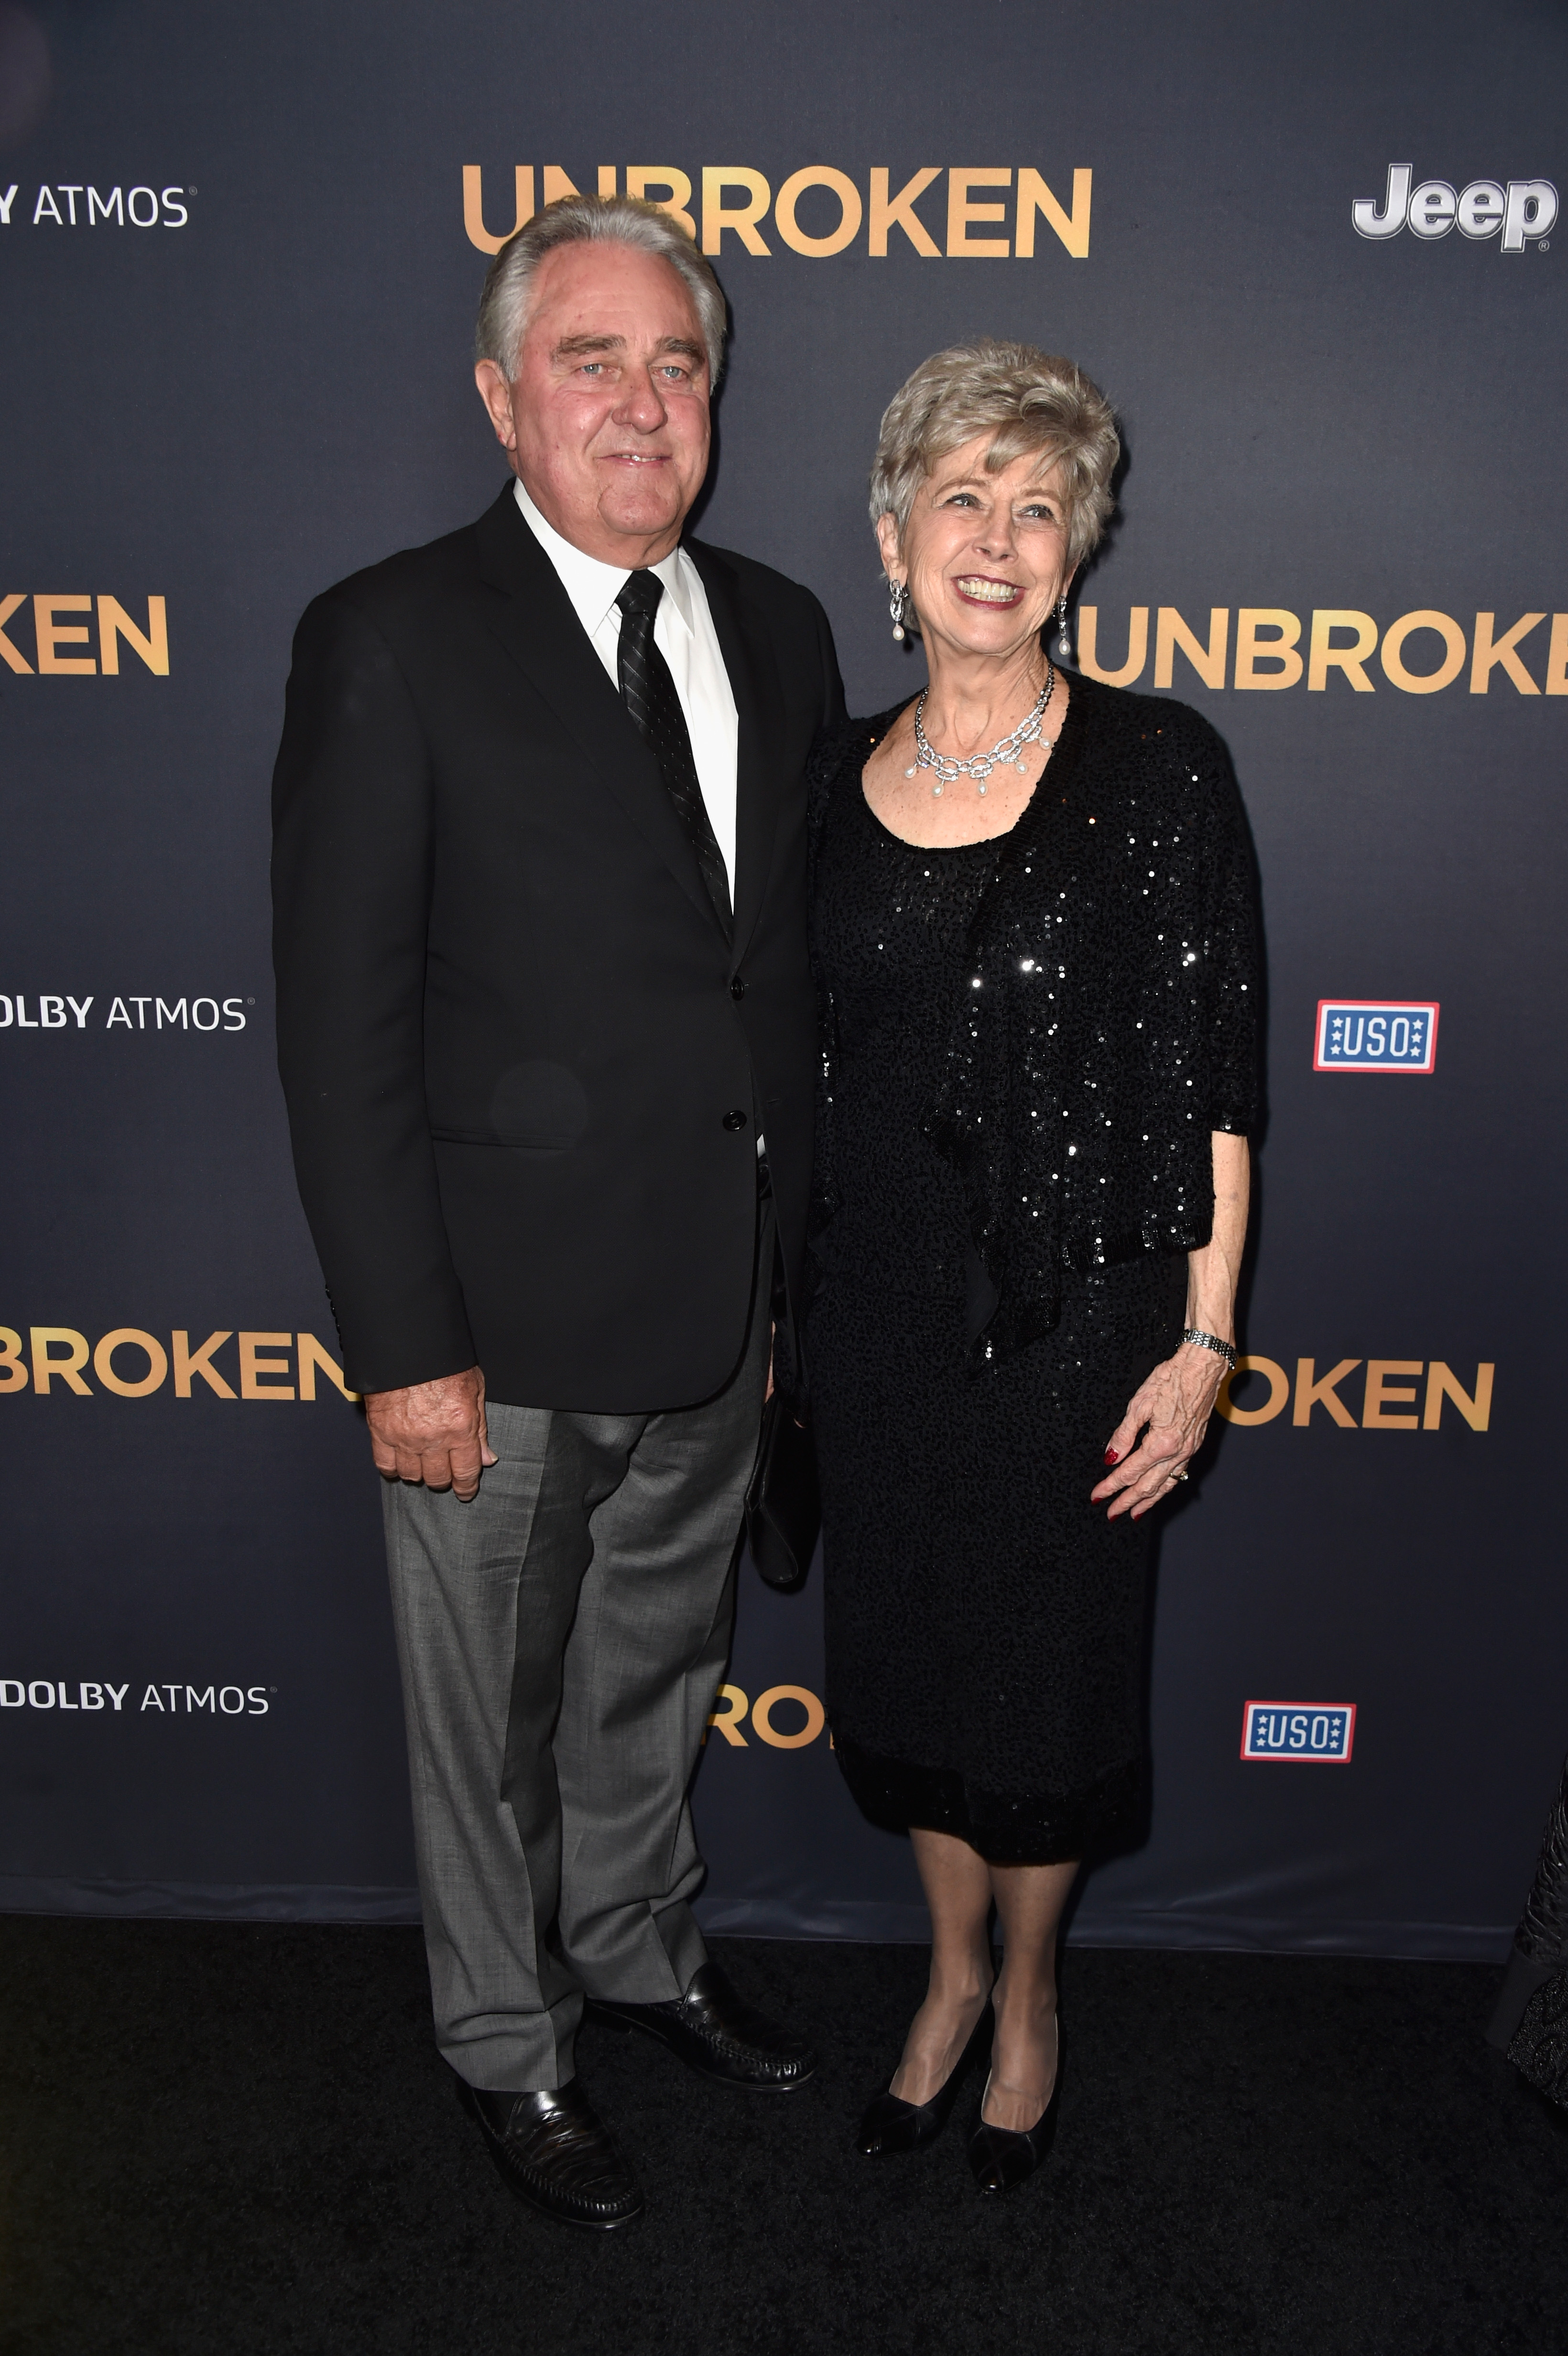 William Alvin Pitt and Jane Pitt arrive at the Premiere Of Universal Studios' "Unbroken" at TCL Chinese Theatre on December 15, 2014, in Hollywood, California. | Source: Getty Images